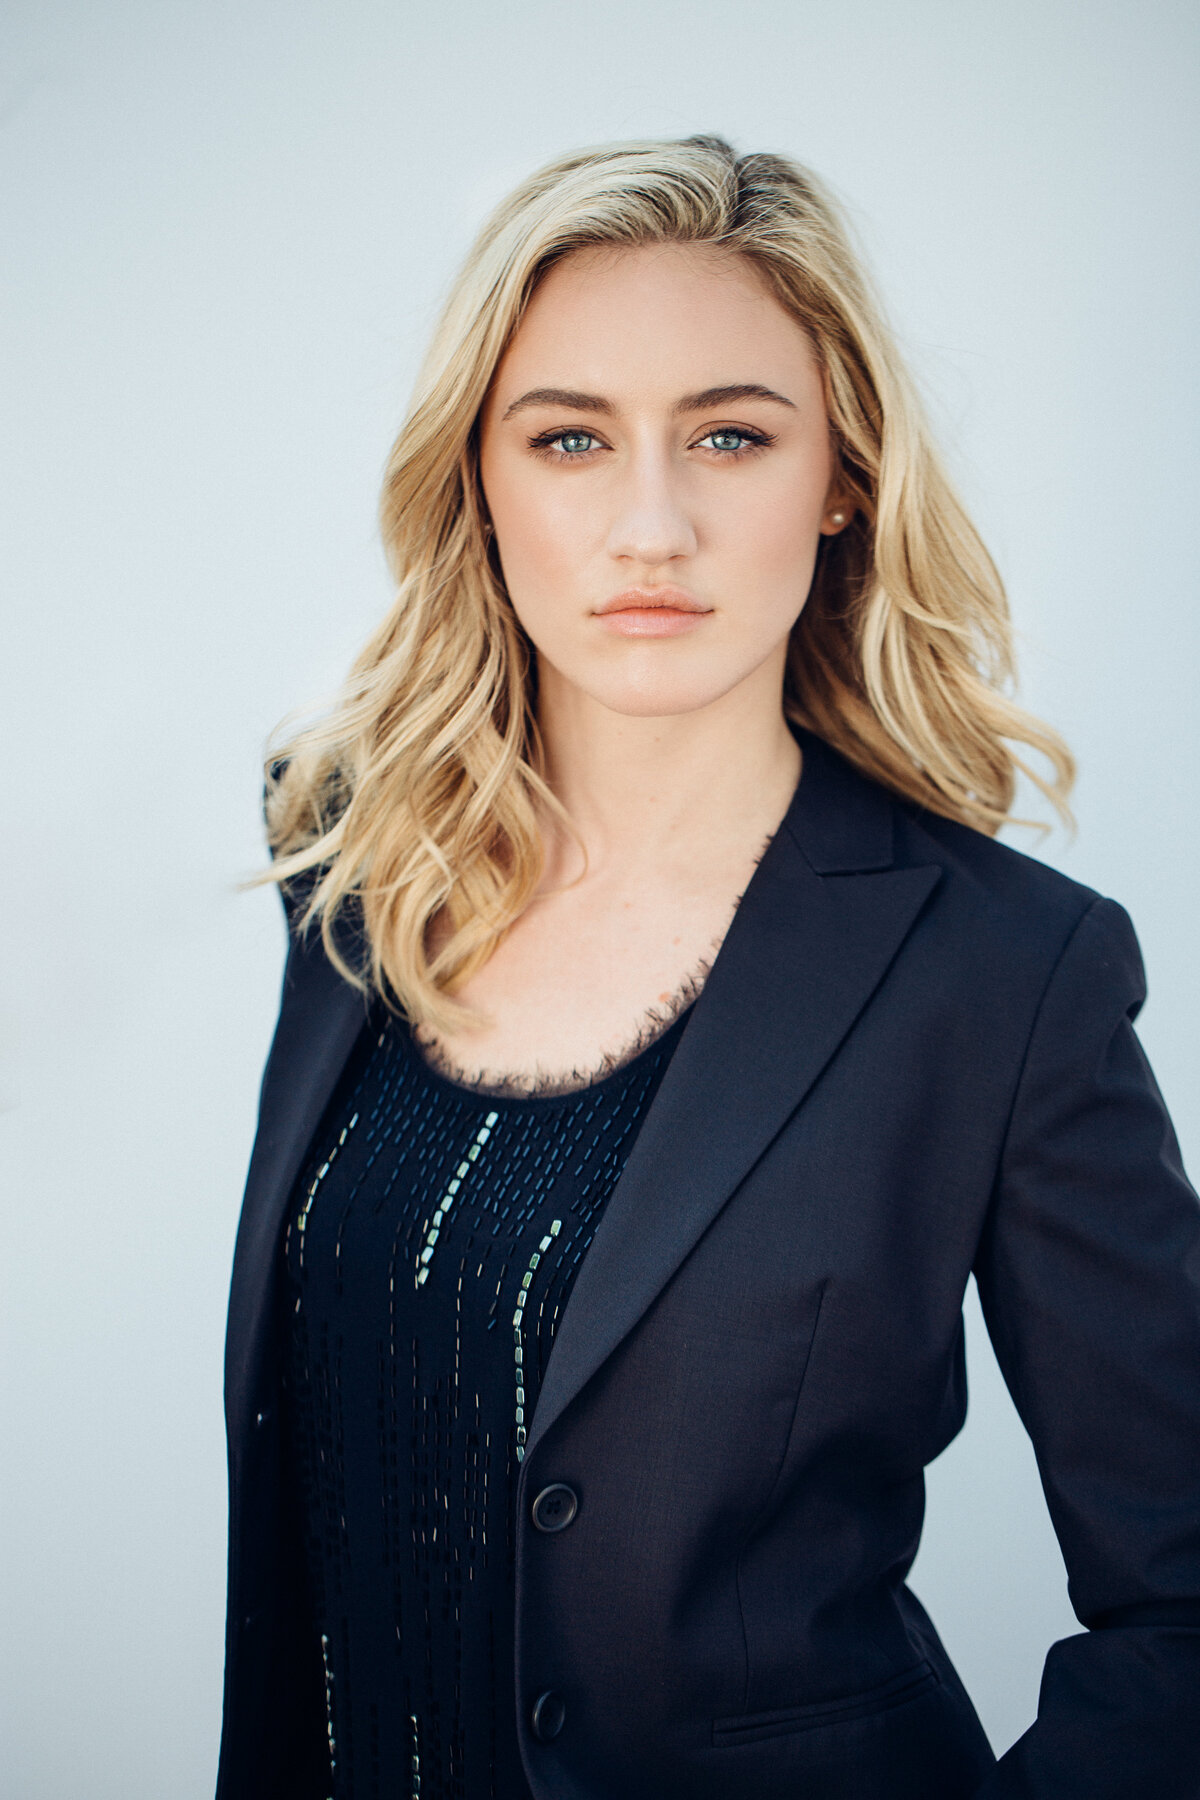 Headshot Photograph Of Young Woman In Outer Black Blazer And Inner Black Blouse Los Angeles